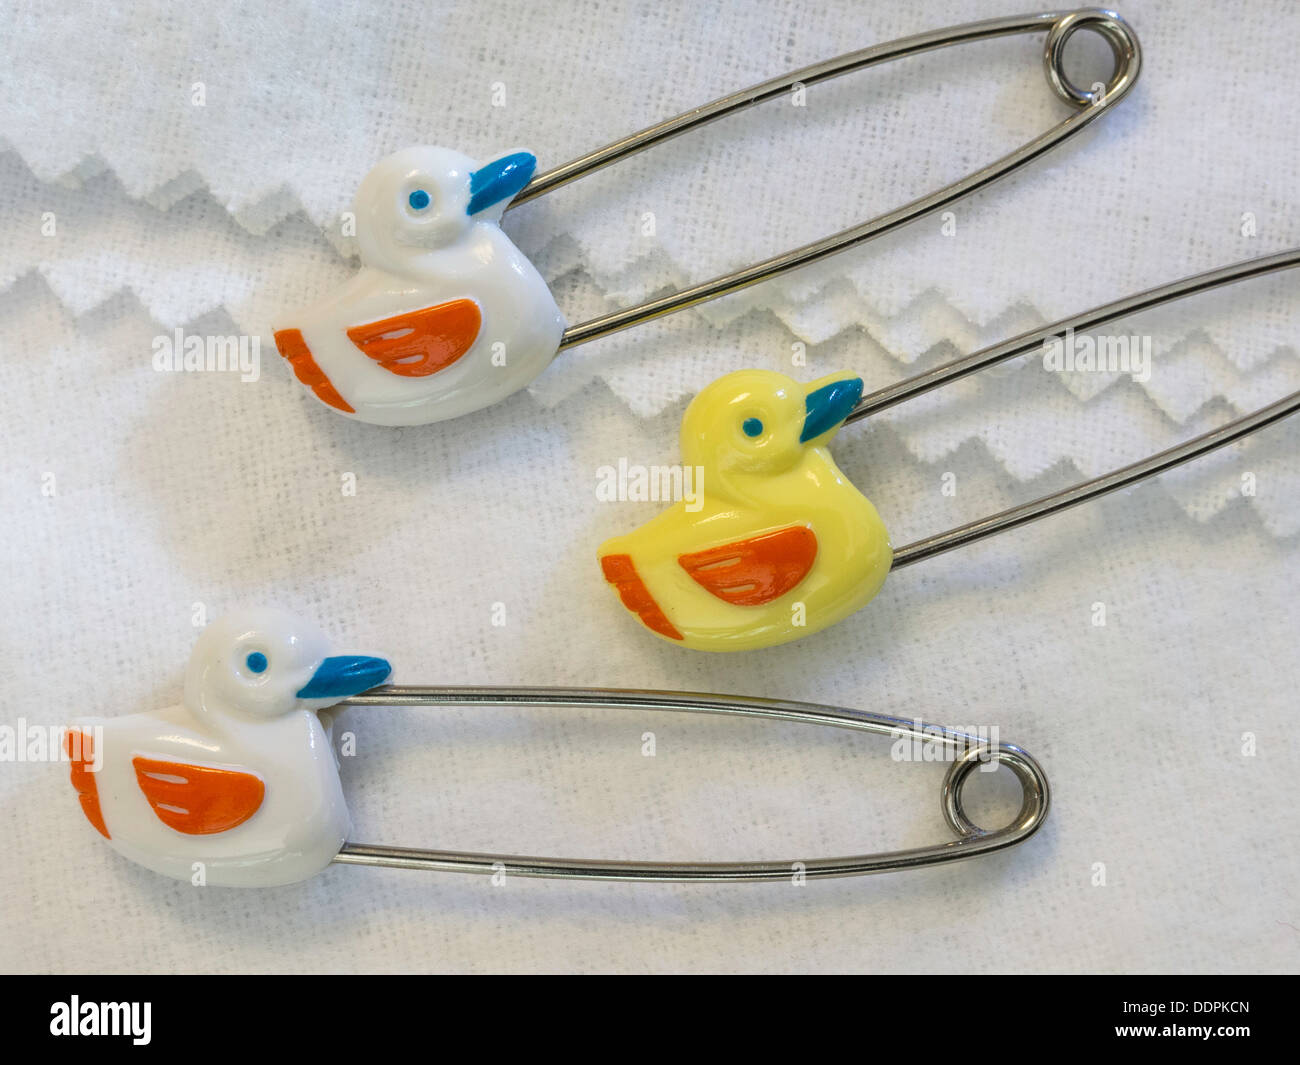 All the cute safety pins that were used with cloth diapers